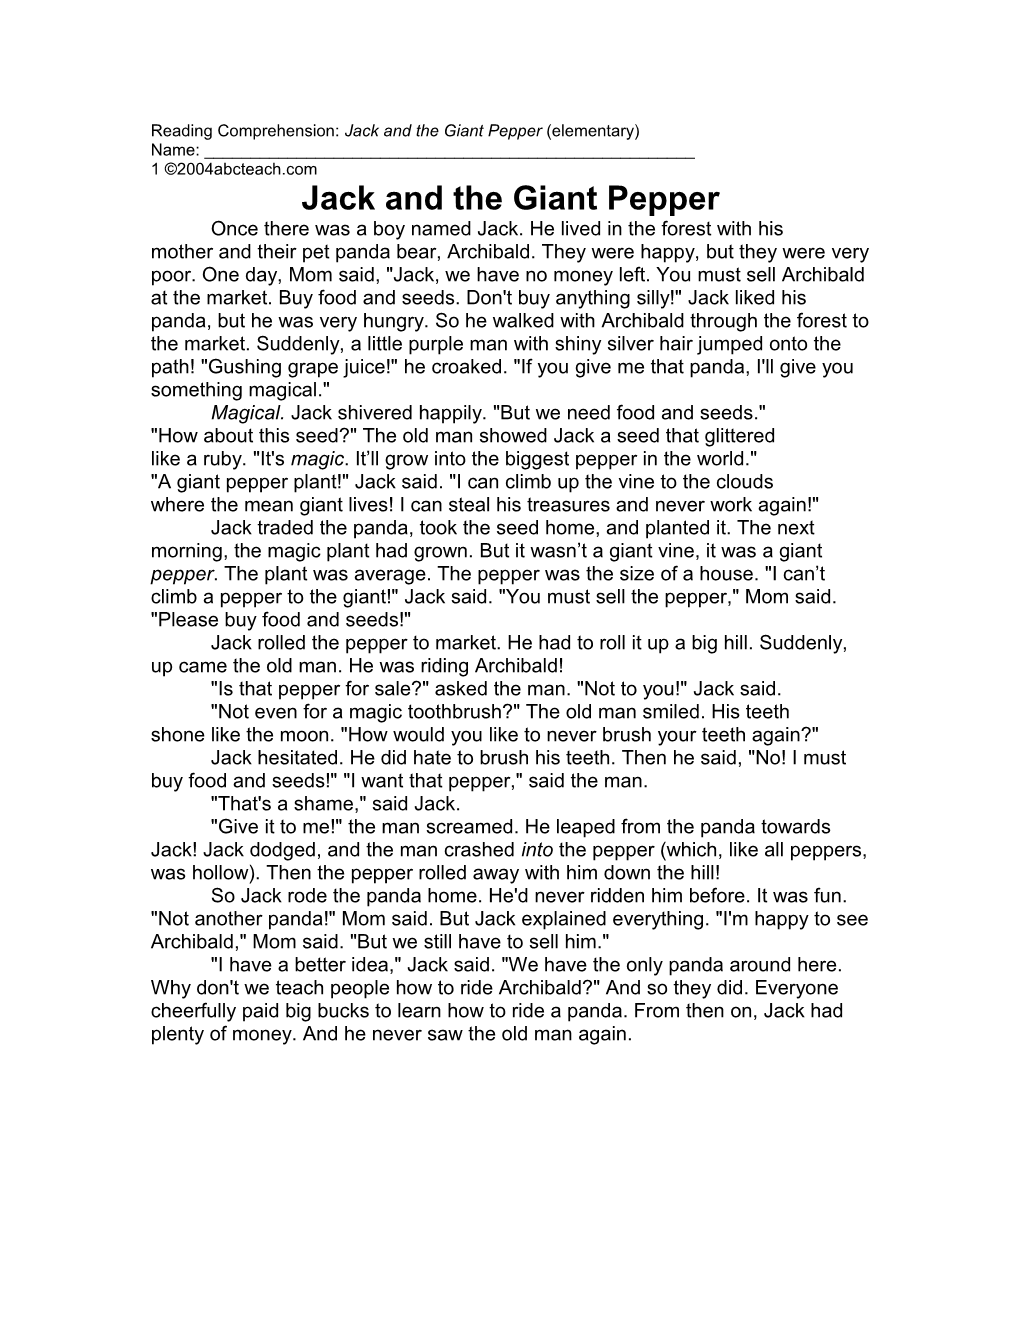 Reading Comprehension: Jack and the Giant Pepper (Elementary)